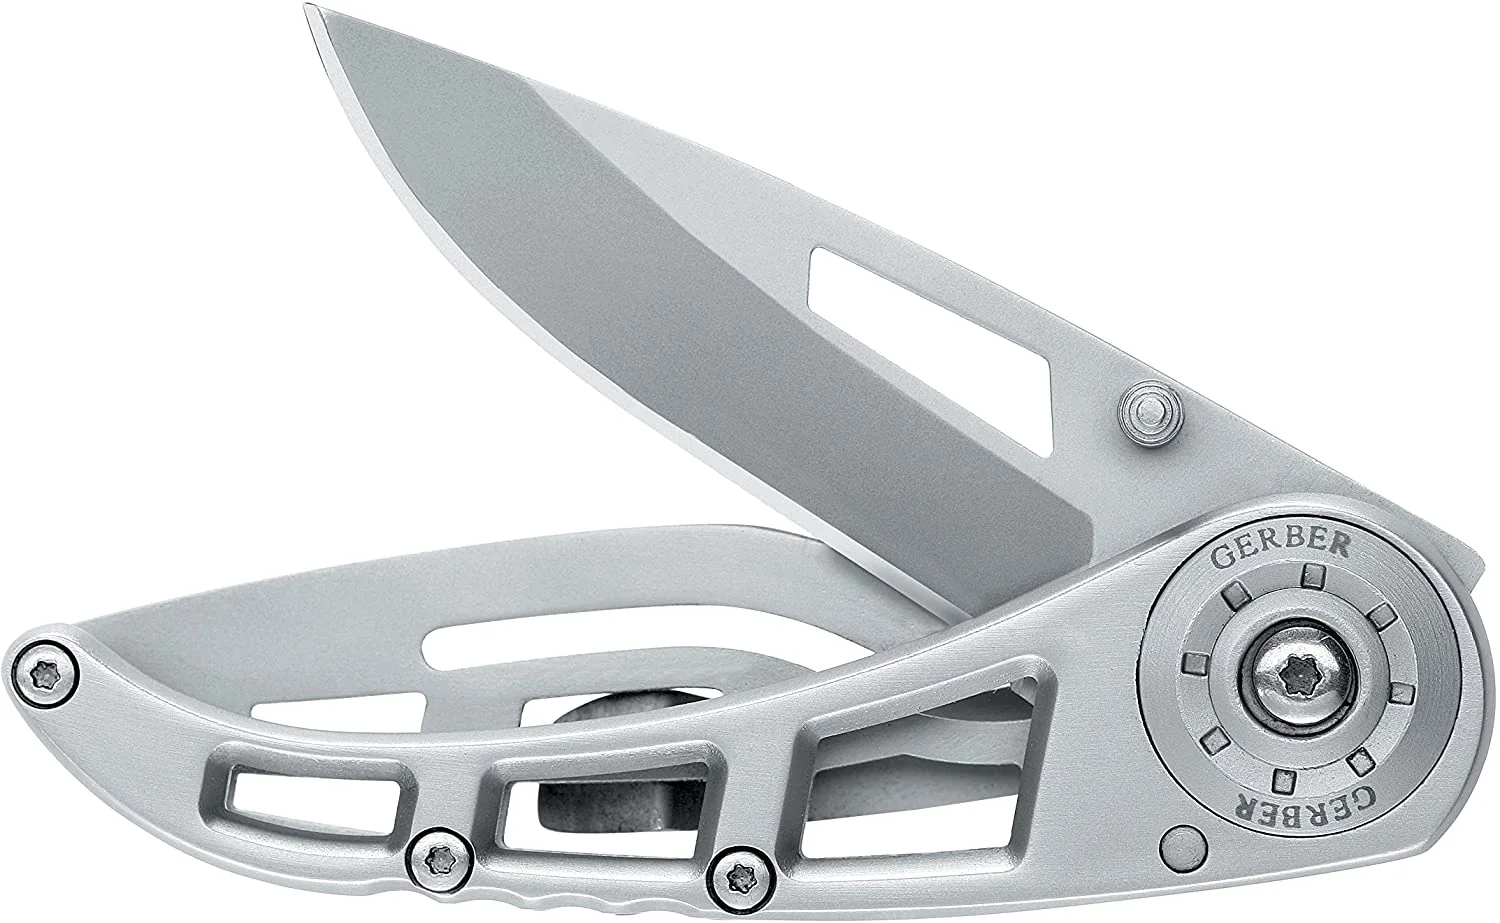 Top-Rated EDC Pocket Knives Under $50